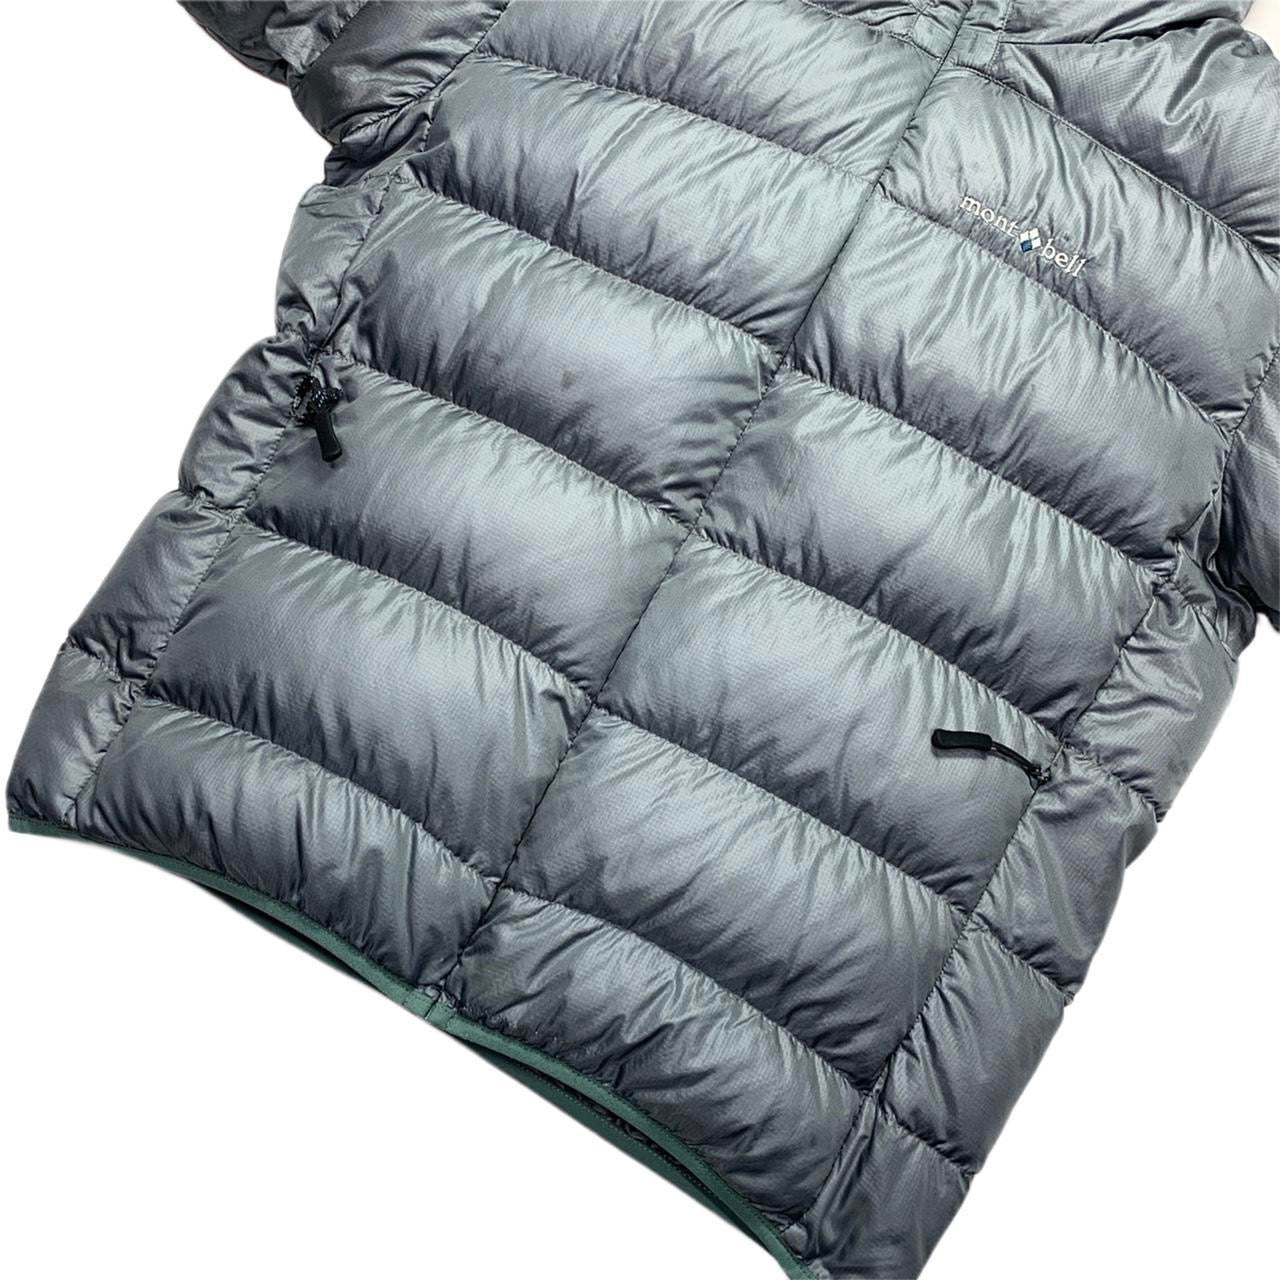 Montbell Puffer Jacket